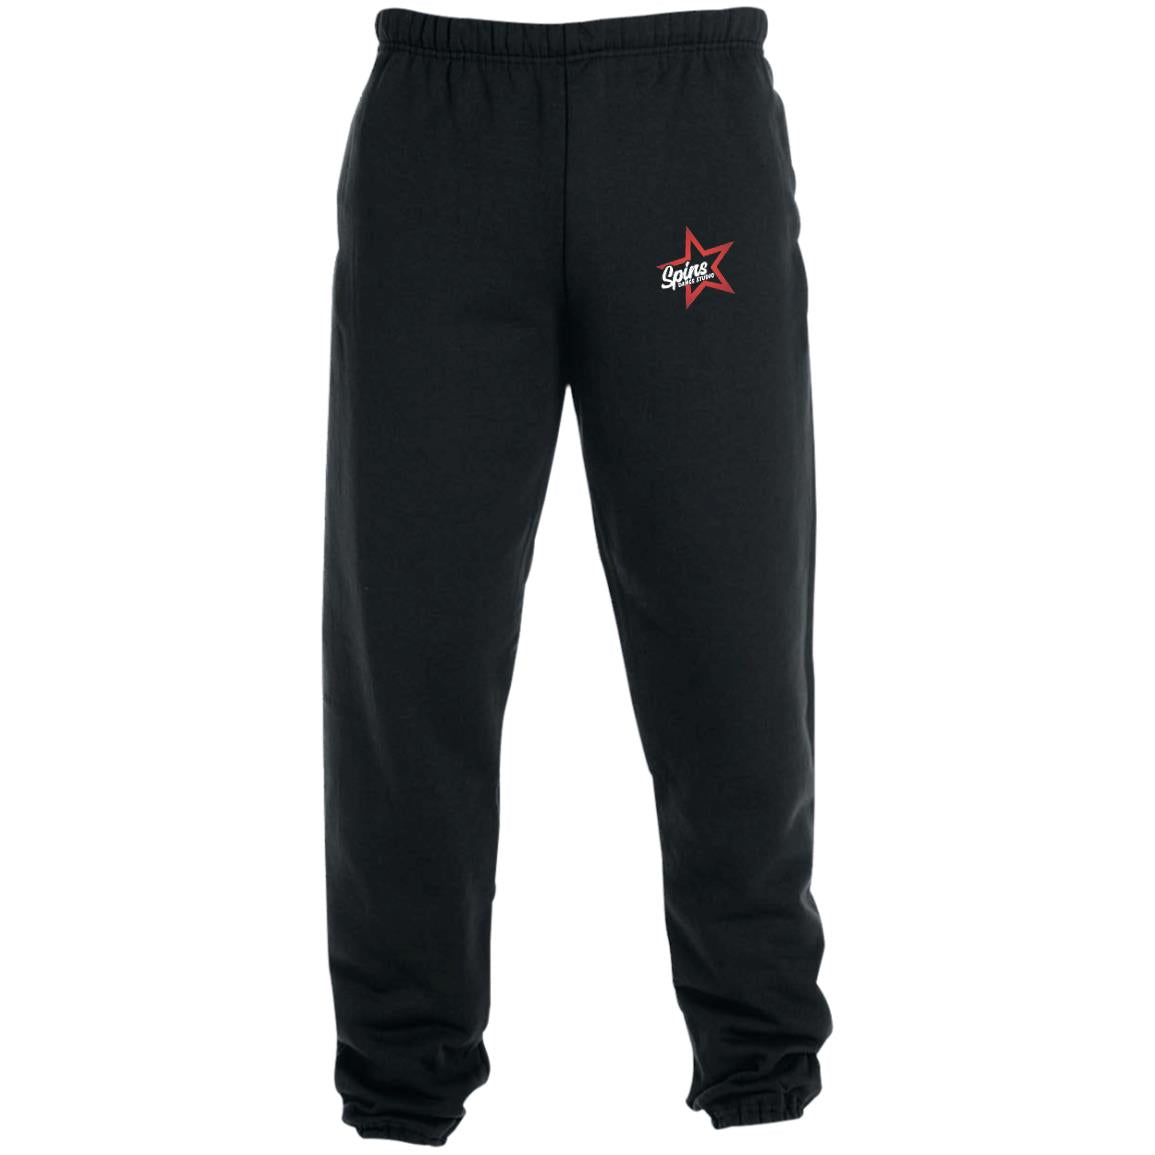 Closed Bottom Sweatpants with Pockets